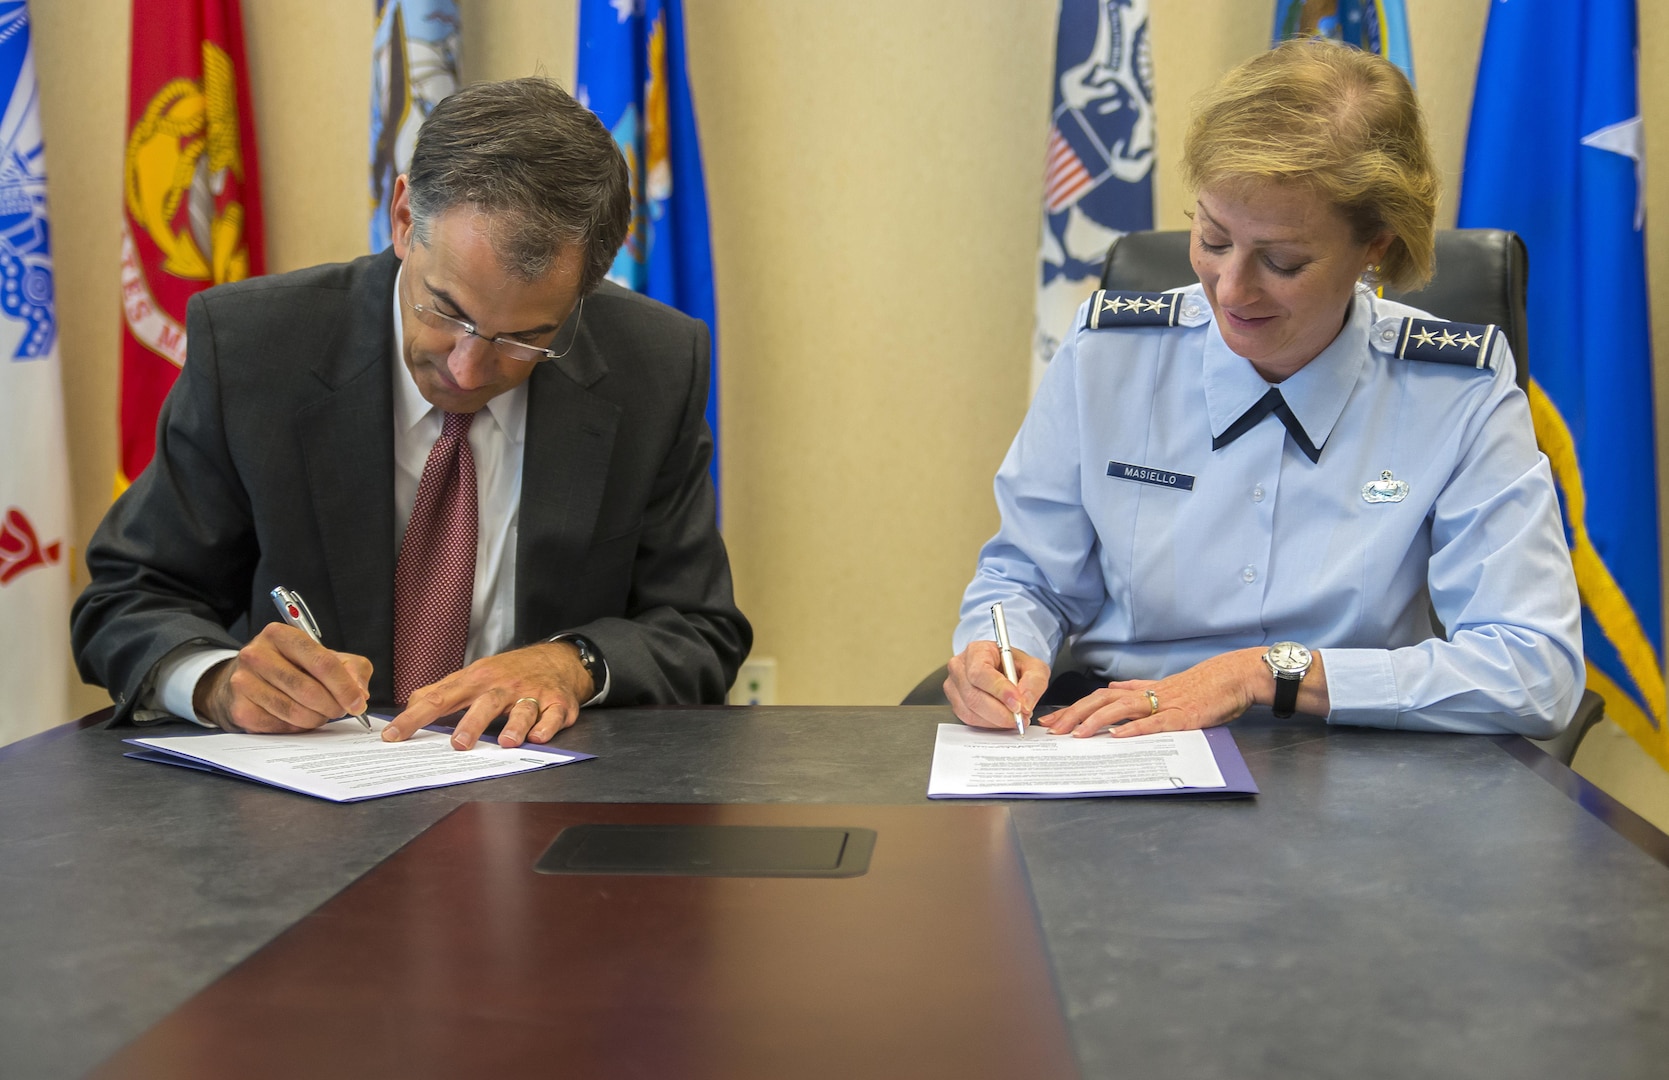 James Woolsey, Defense Acquisition University president, and Air Force Lt. Gen. Wendy Masiello, Defense Contract Management Agency director, sign a memorandum of agreement August 15 at DCMA’s Fort Lee, Va., headquarters formalizing their organizations’ continued strategic partnership through the College of Contract
Management.